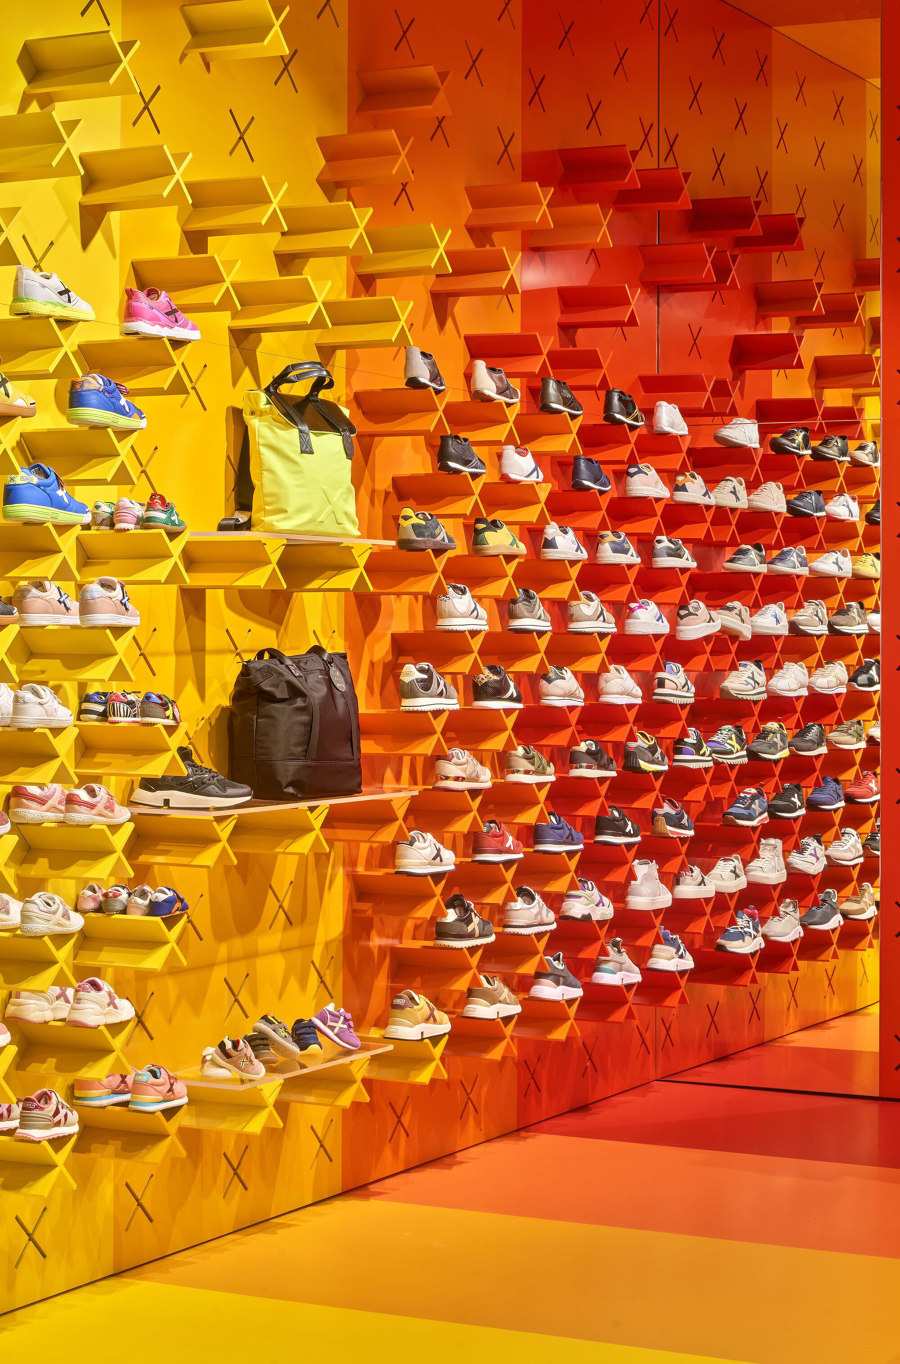 Tread lightly: shoe stores with brand-focused lighting concepts | News